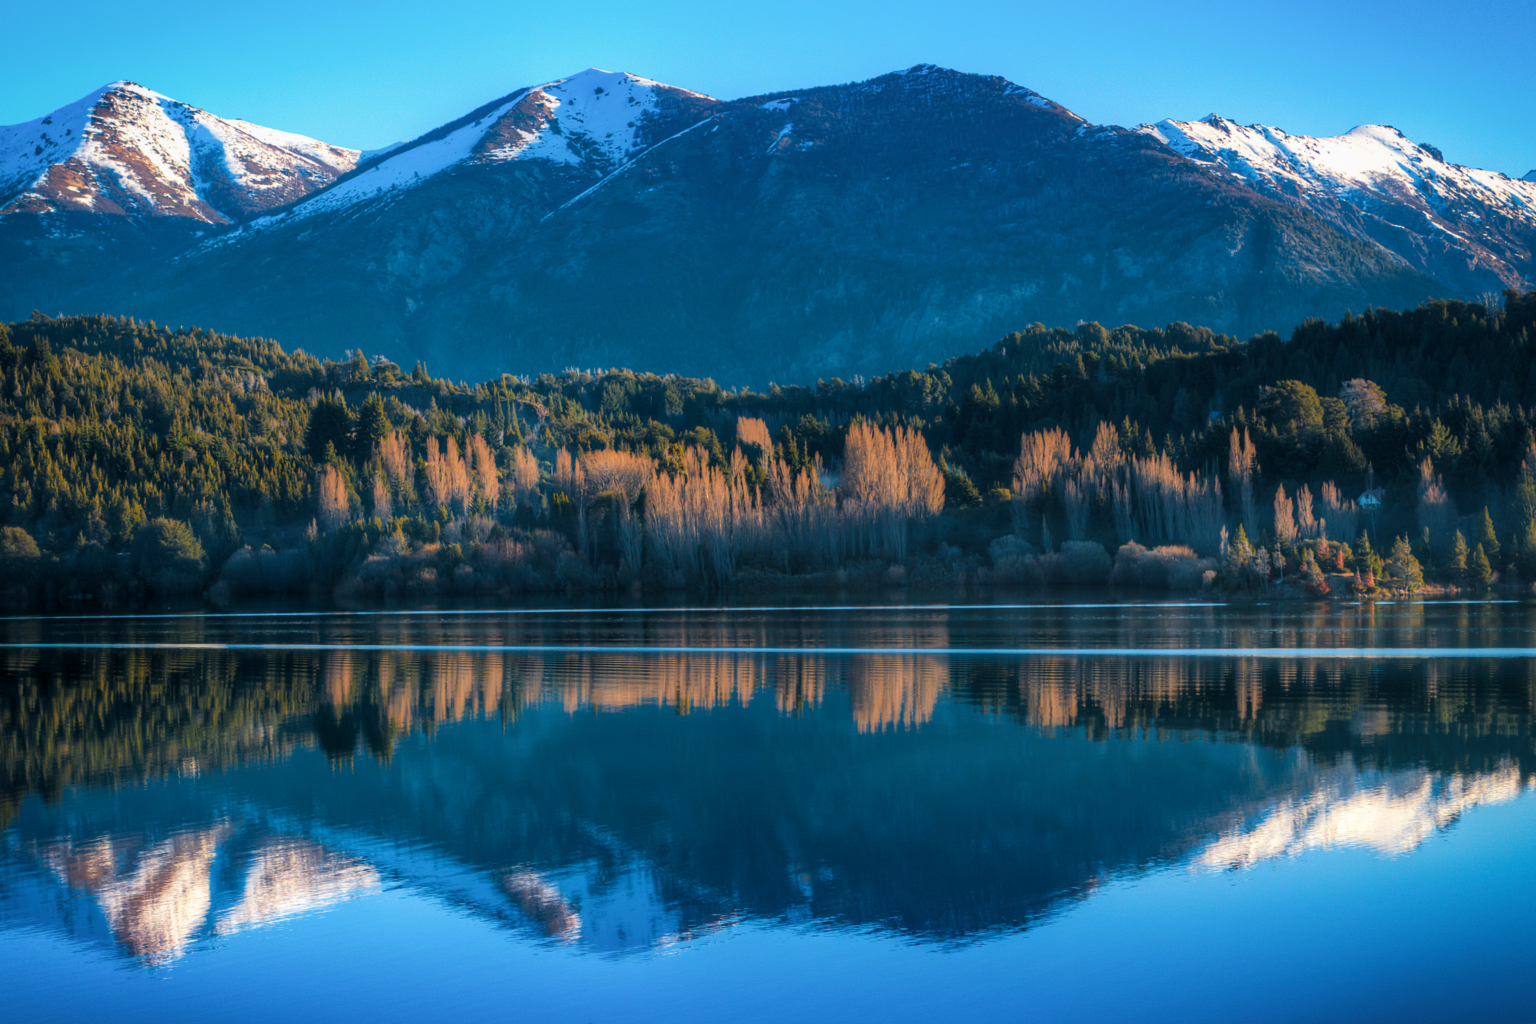 Snow capped mountains reflecting on calm lake